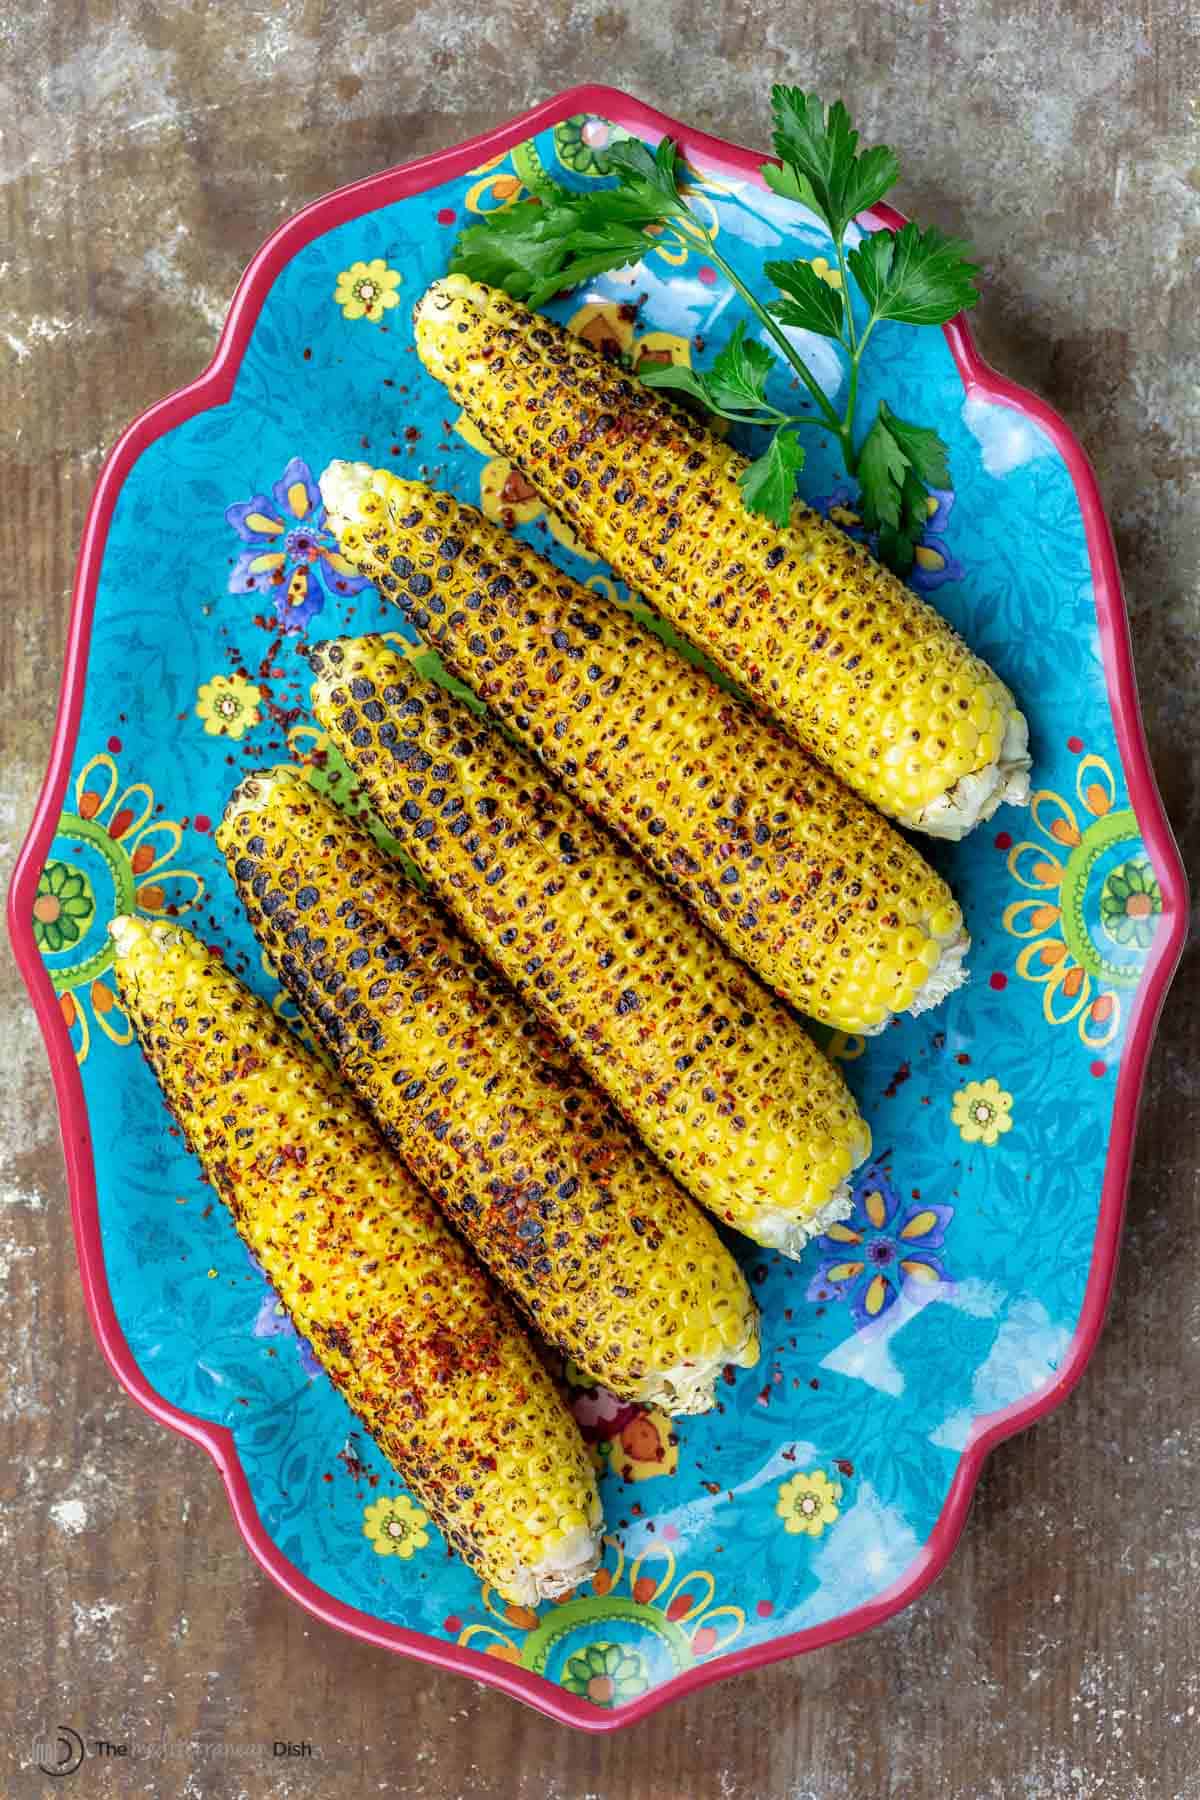 Grilled corn on the cob topped with Aleppo pepper